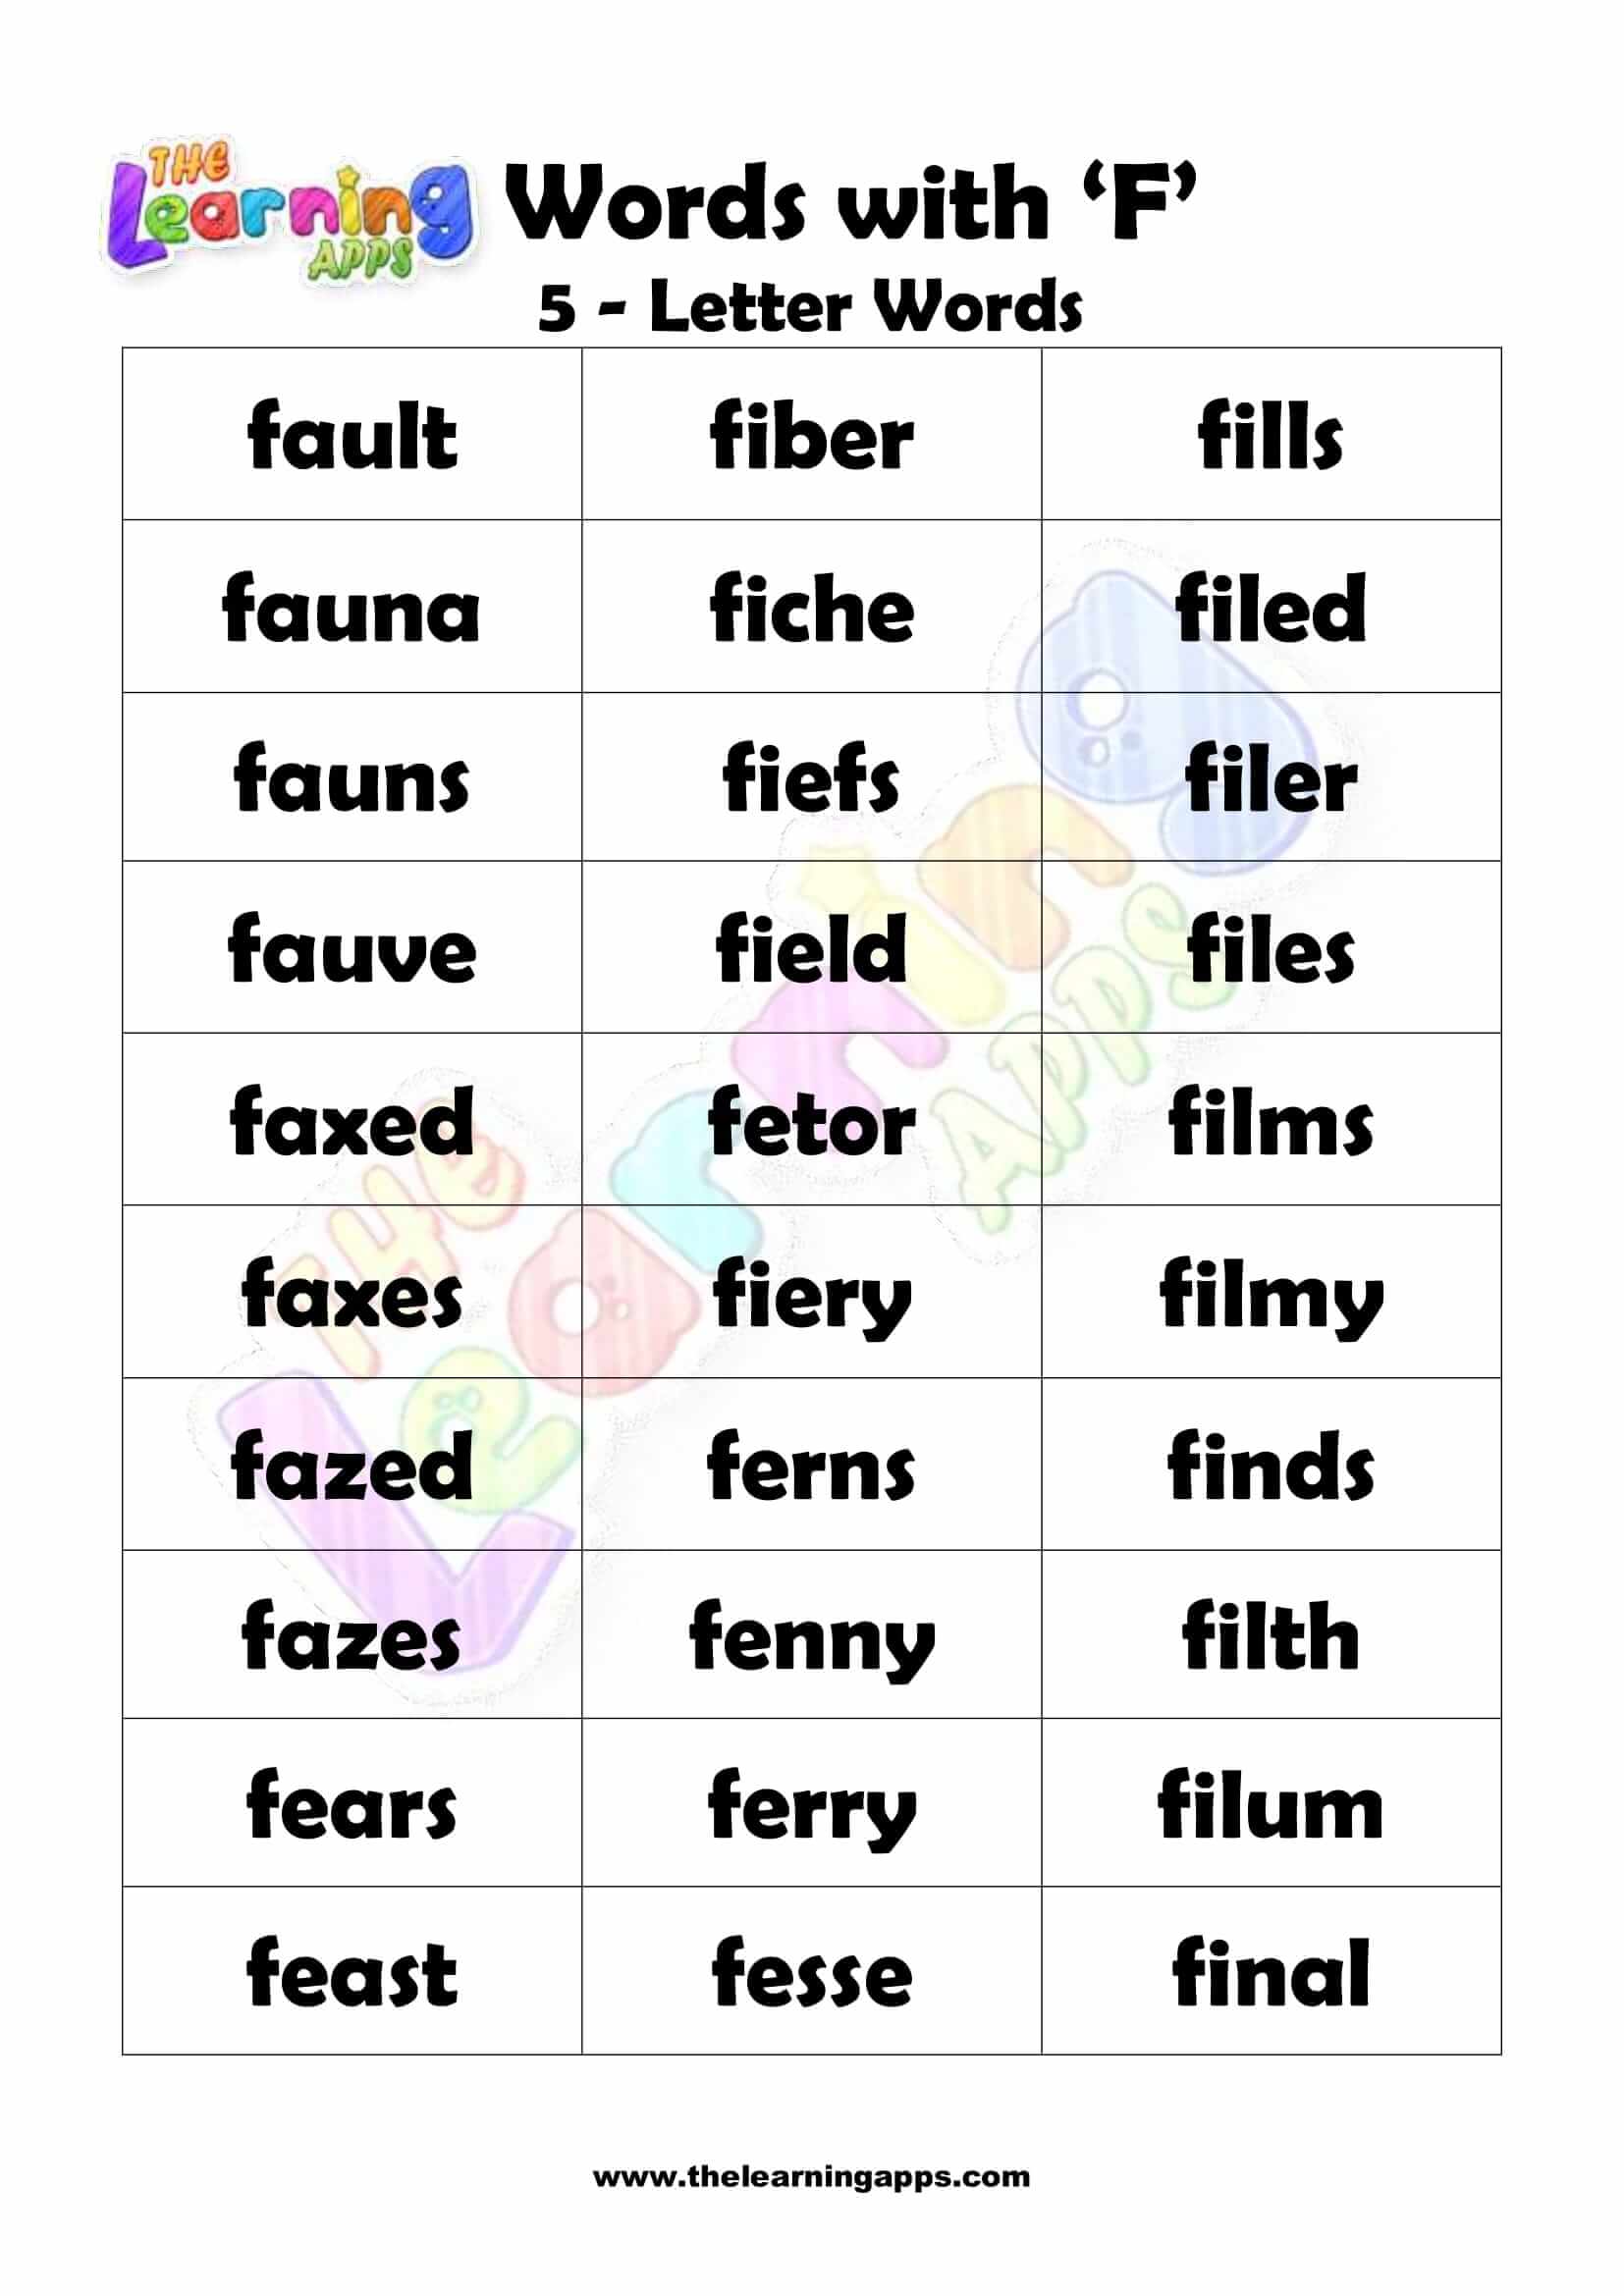 5 LETTER WORD STARTING WITH F-4